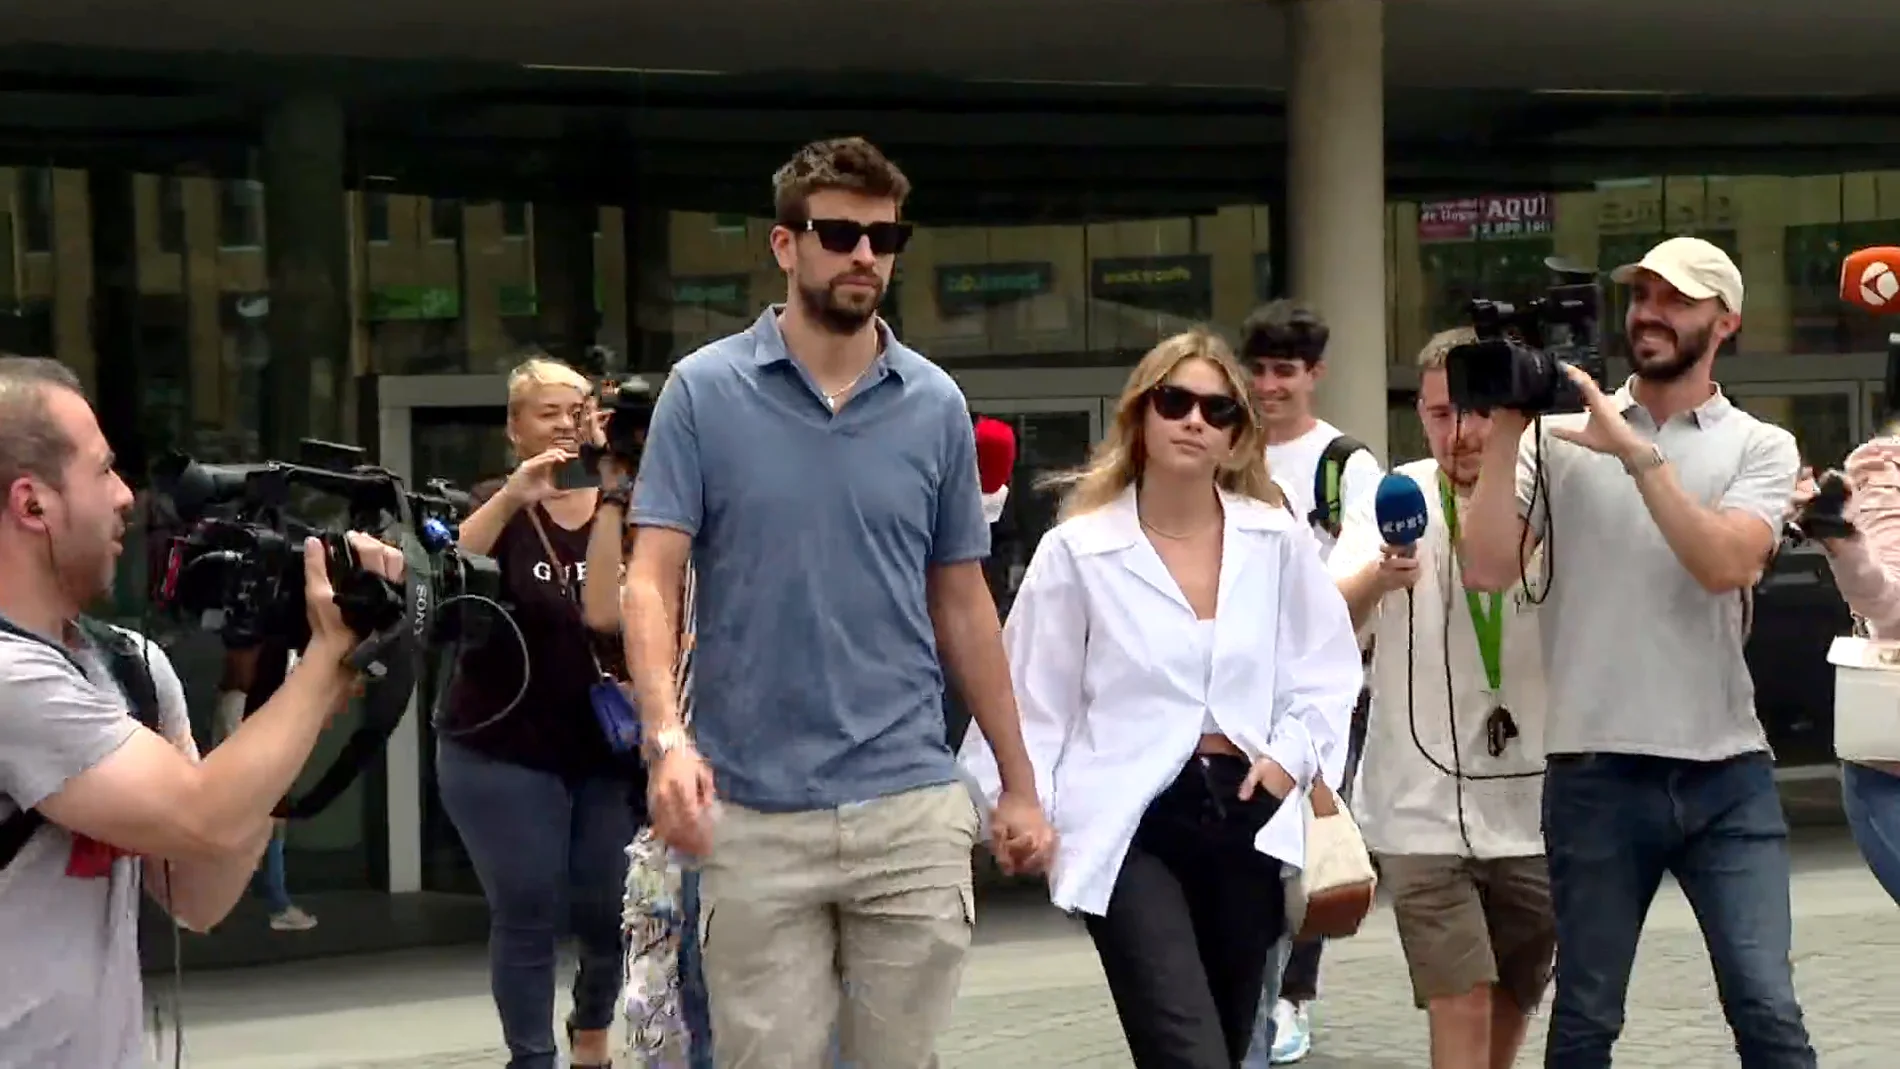 Gerard Piqué and Clara Chia are expected to announce their marriage in